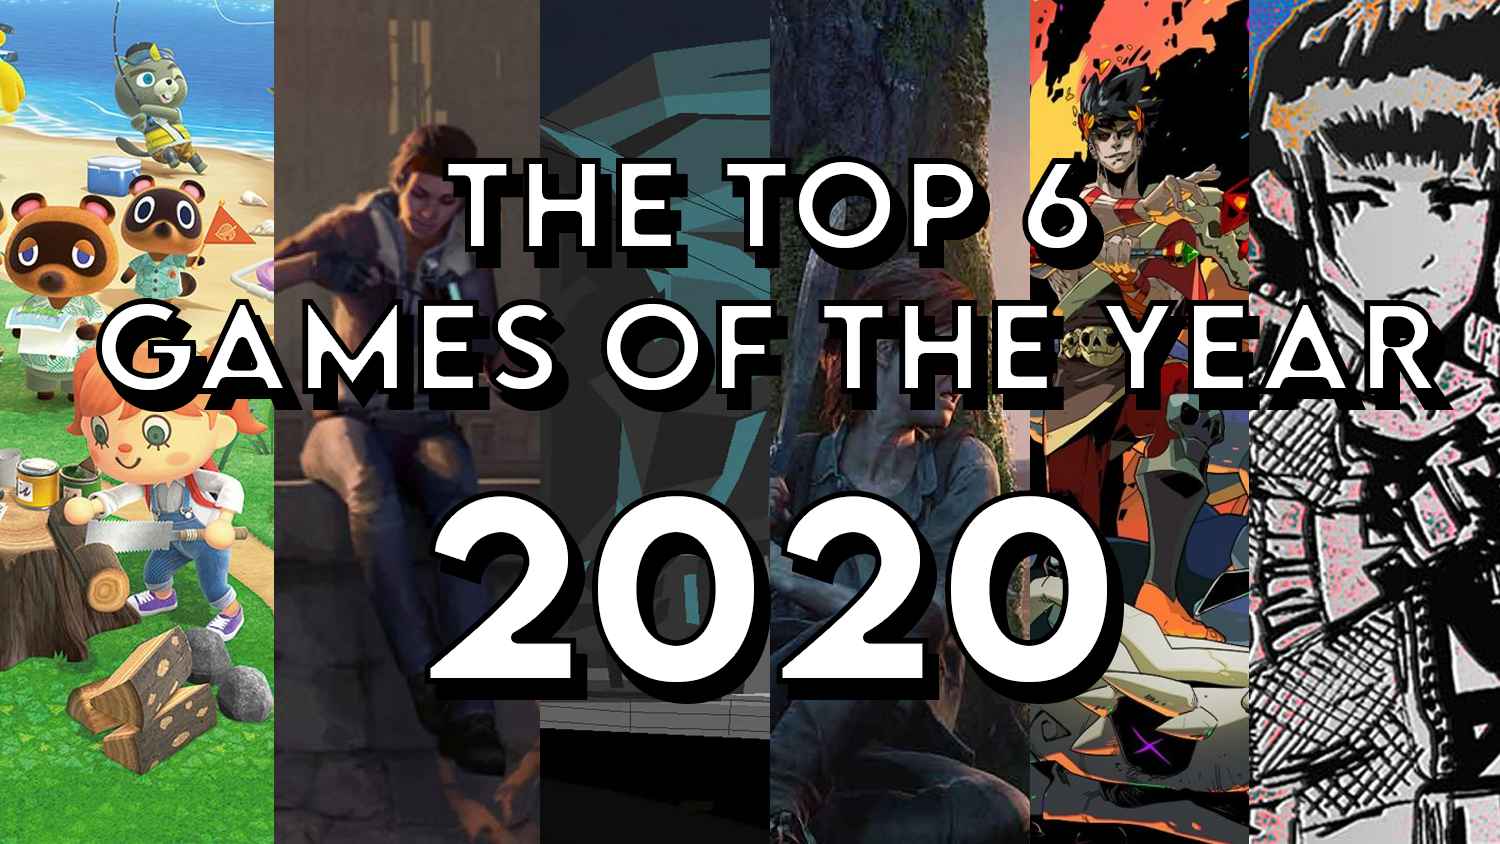 THE TOP 6 GAMES OF 2020 — attack, the